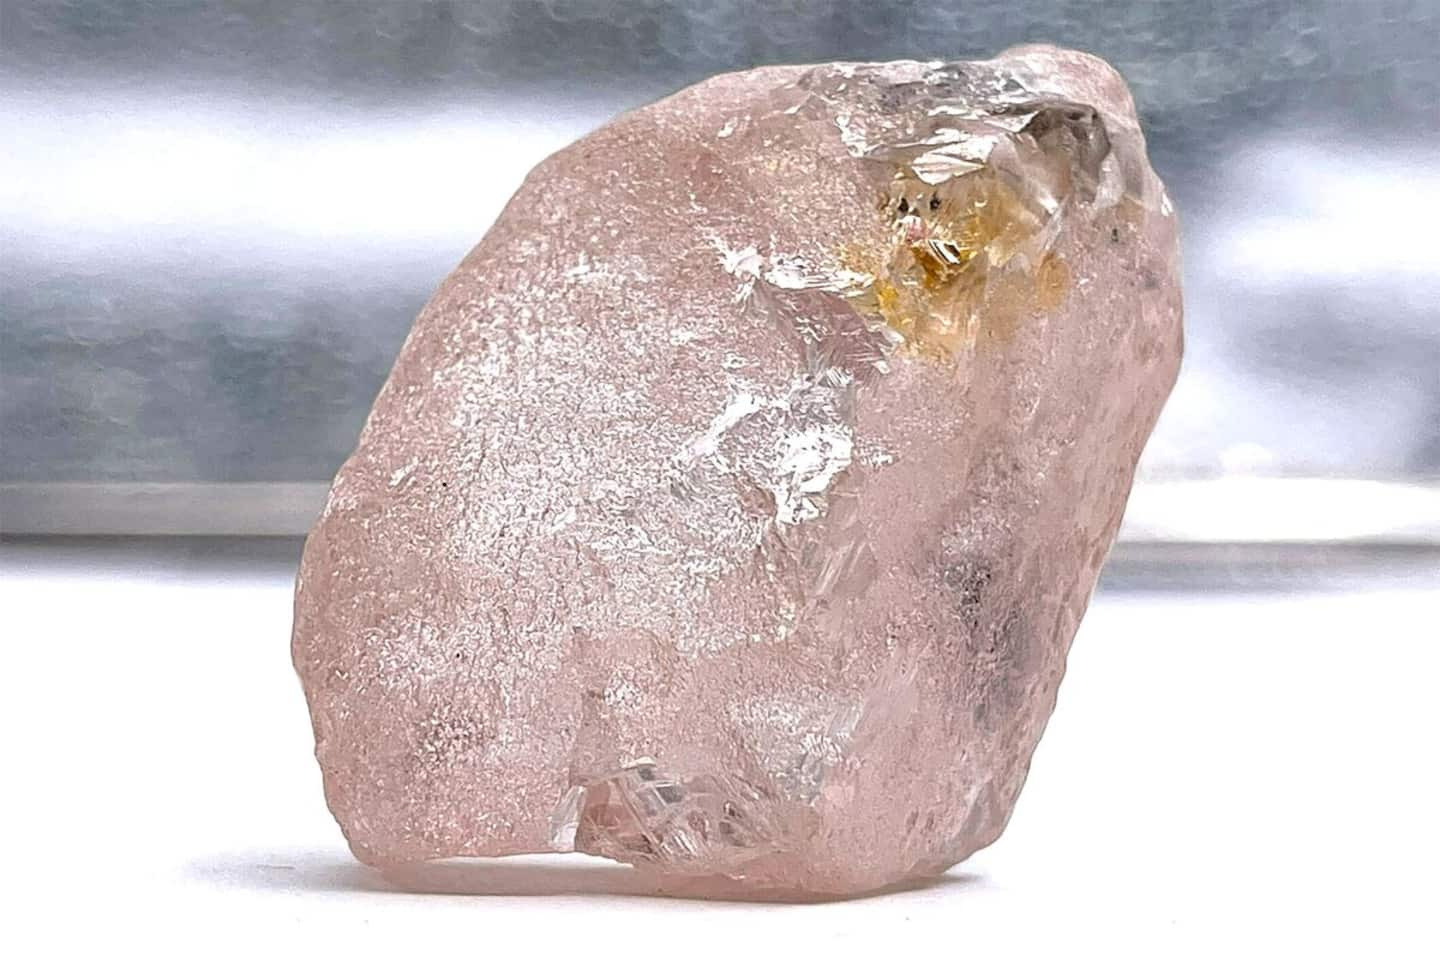 Discovery of a pink diamond considered the largest in 300 years